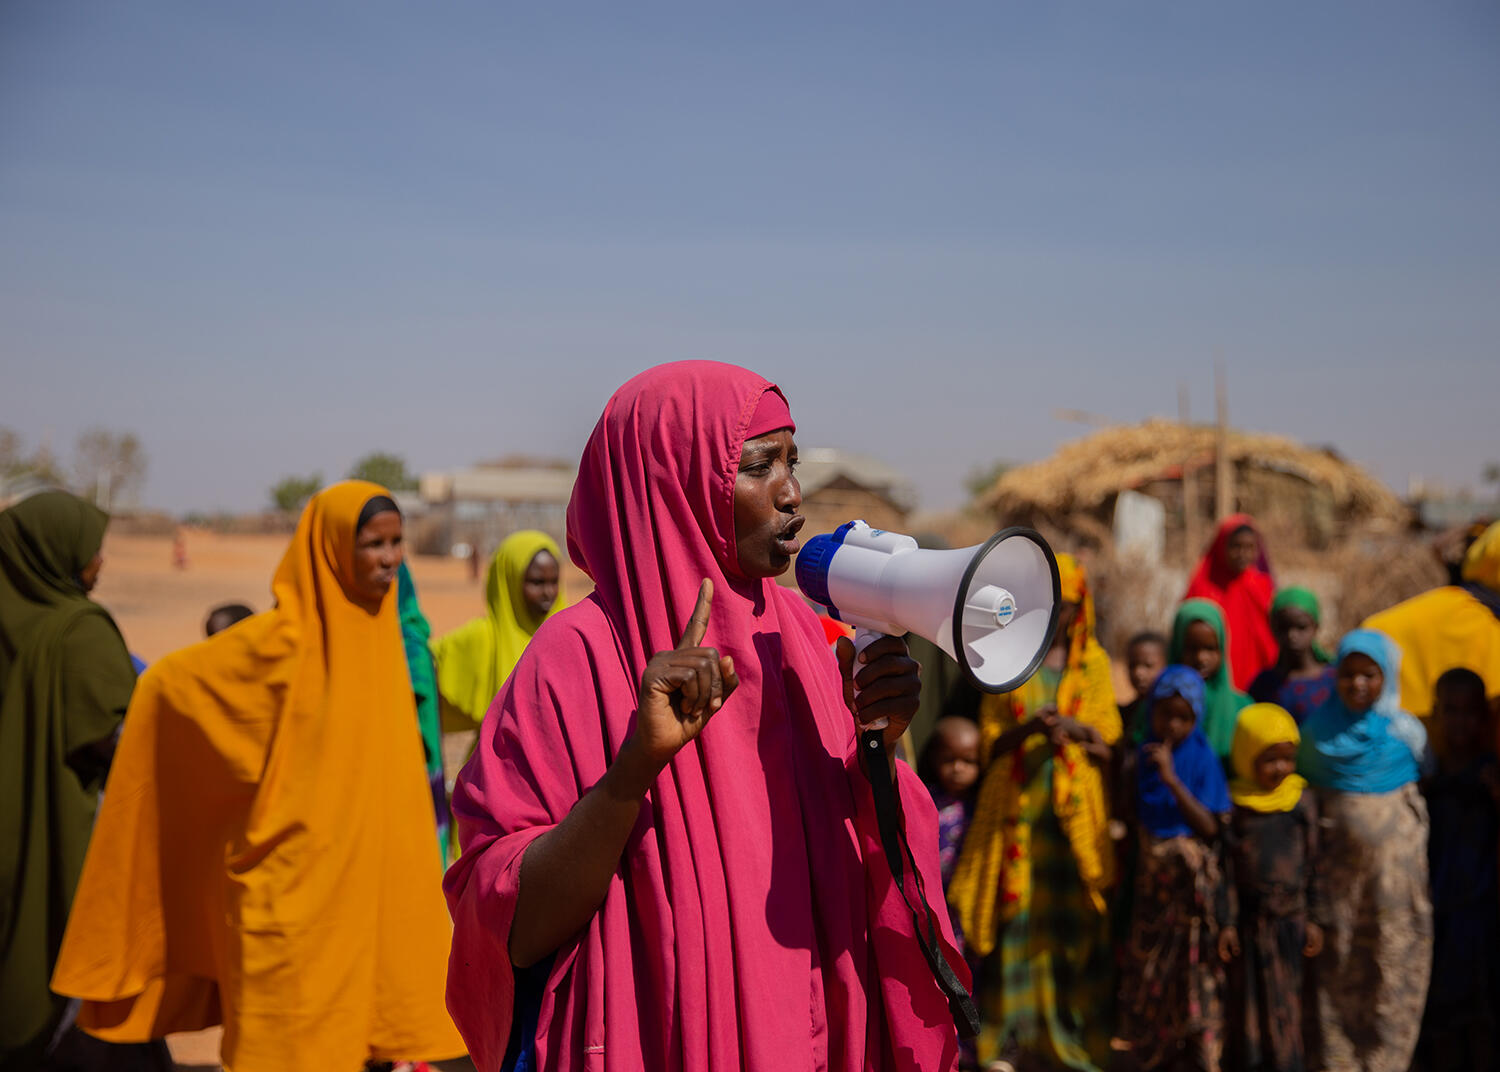 Zainab dressed in pink speaks into a megaphone in front of a crowd of people in Helowyn camp in Ethiopia. 